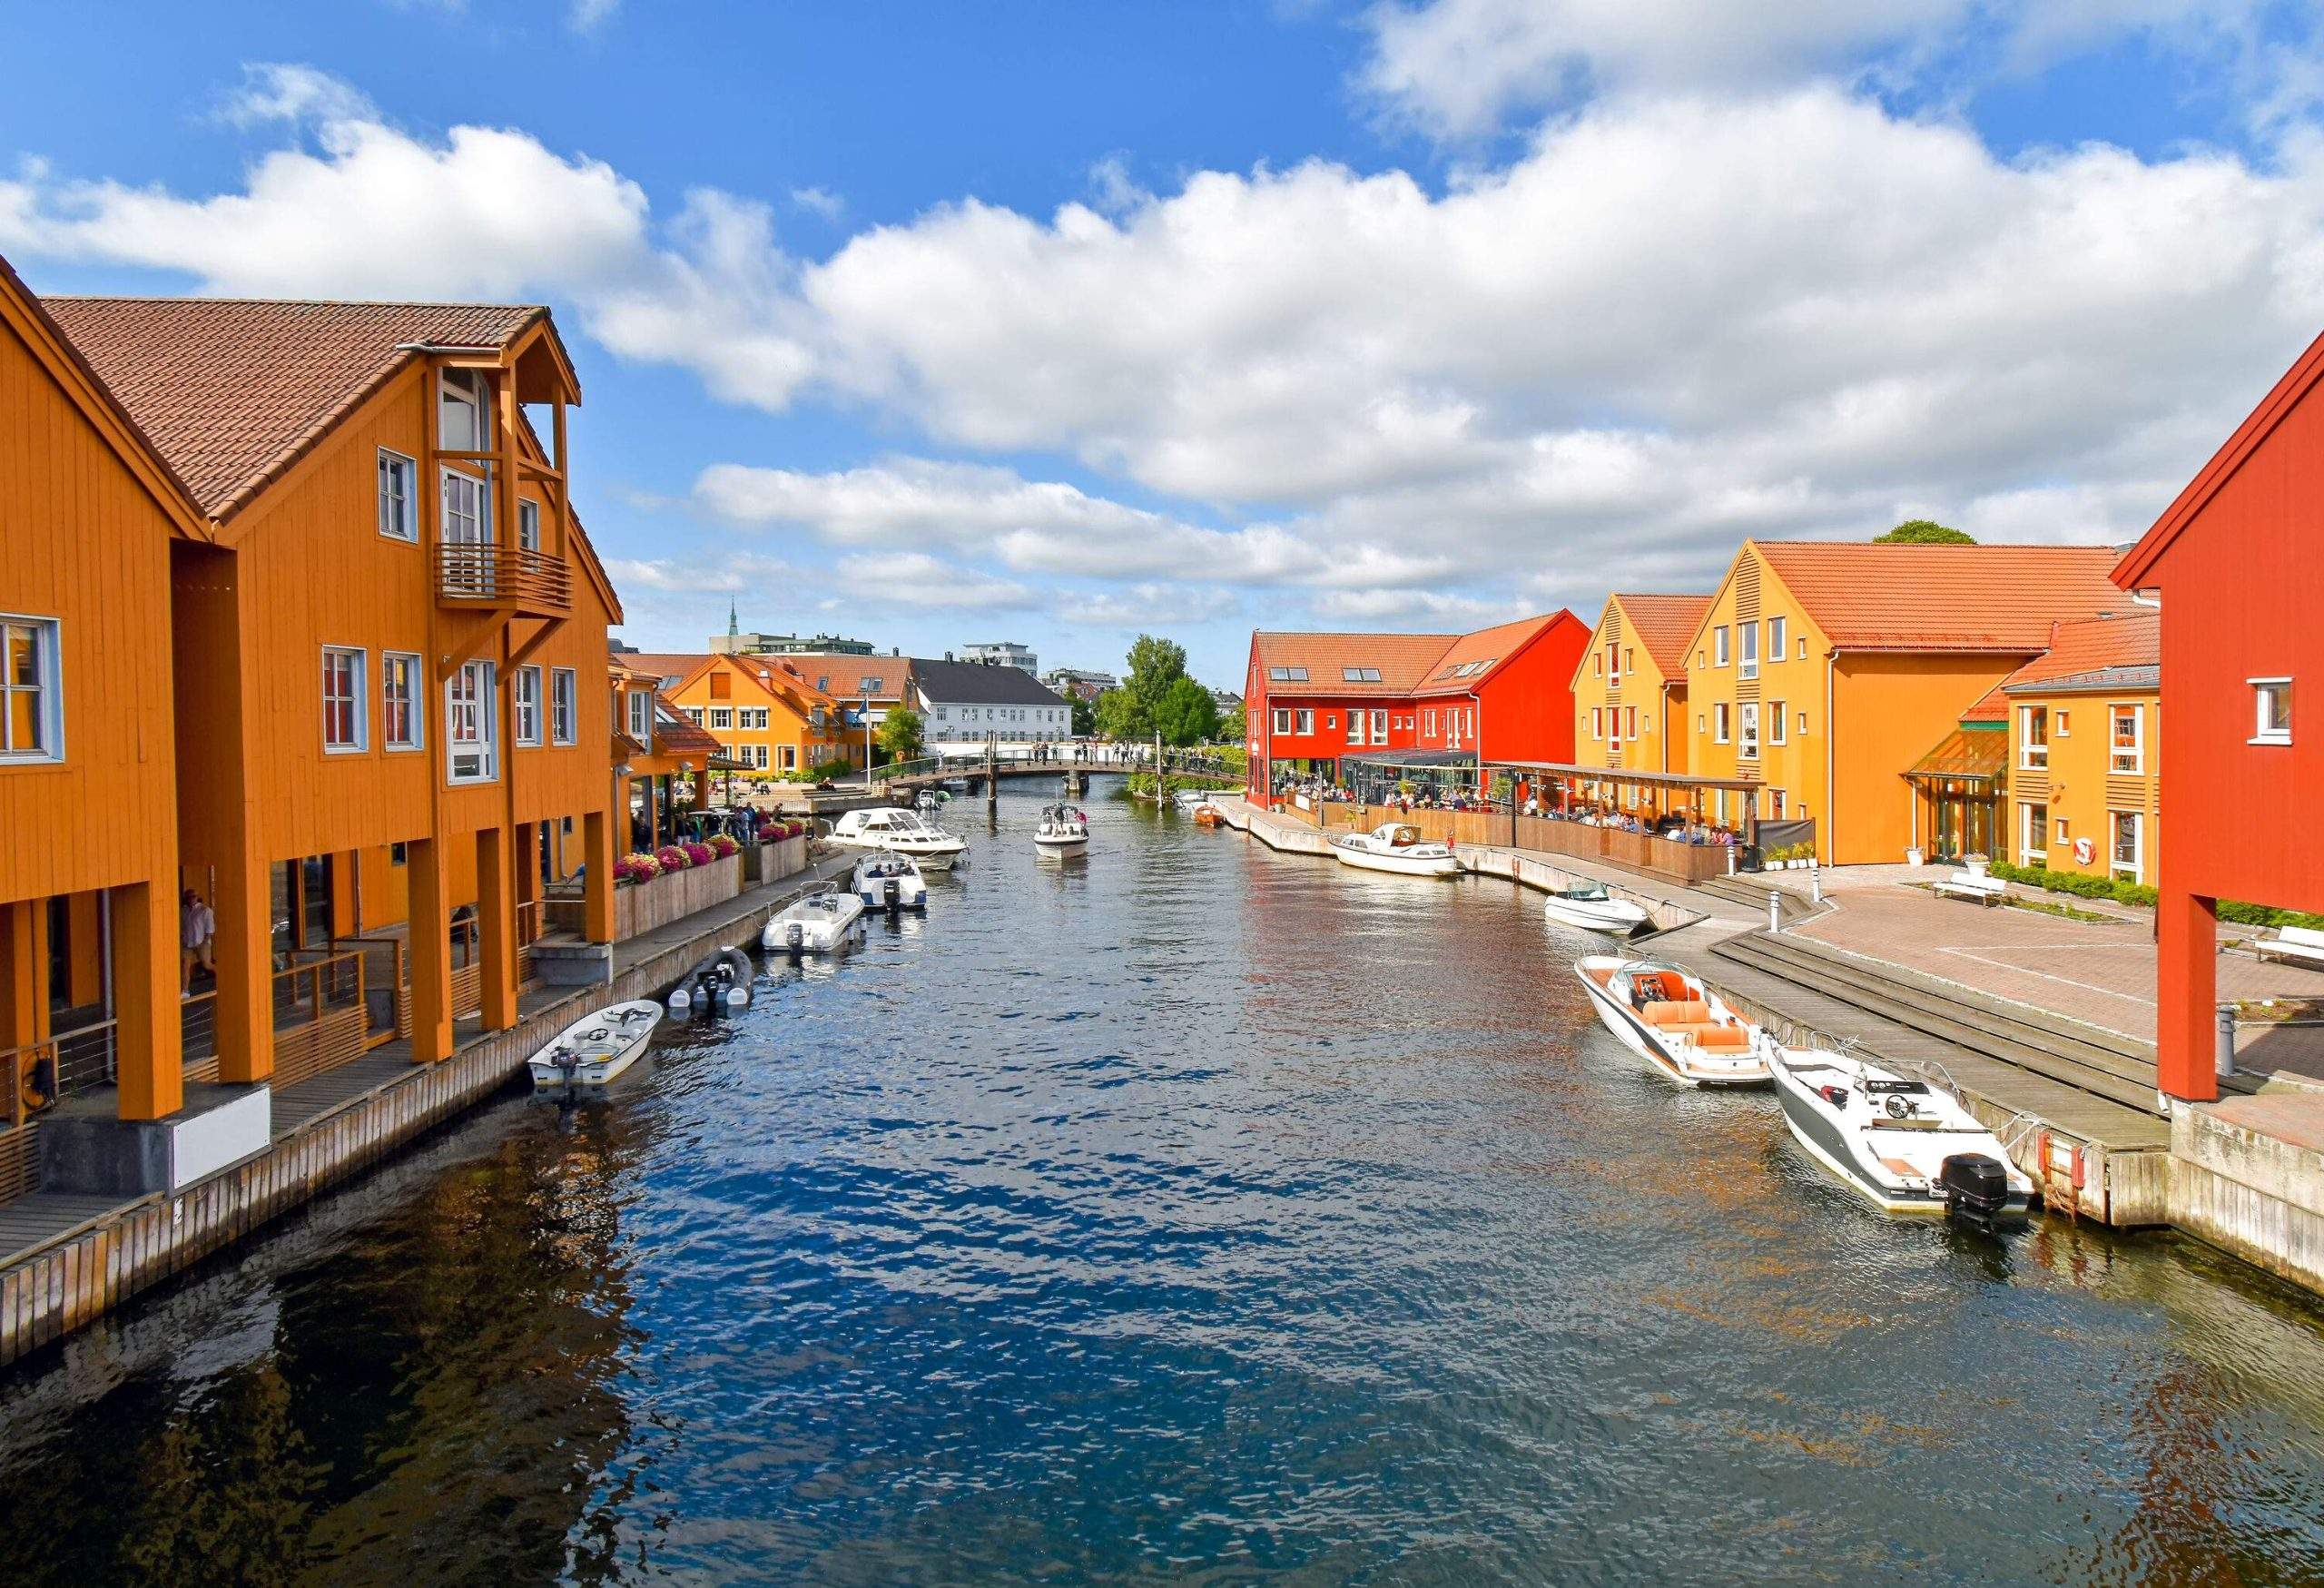 A waterfront scene featuring moored boats alongside buildings adorned in shades of orange.